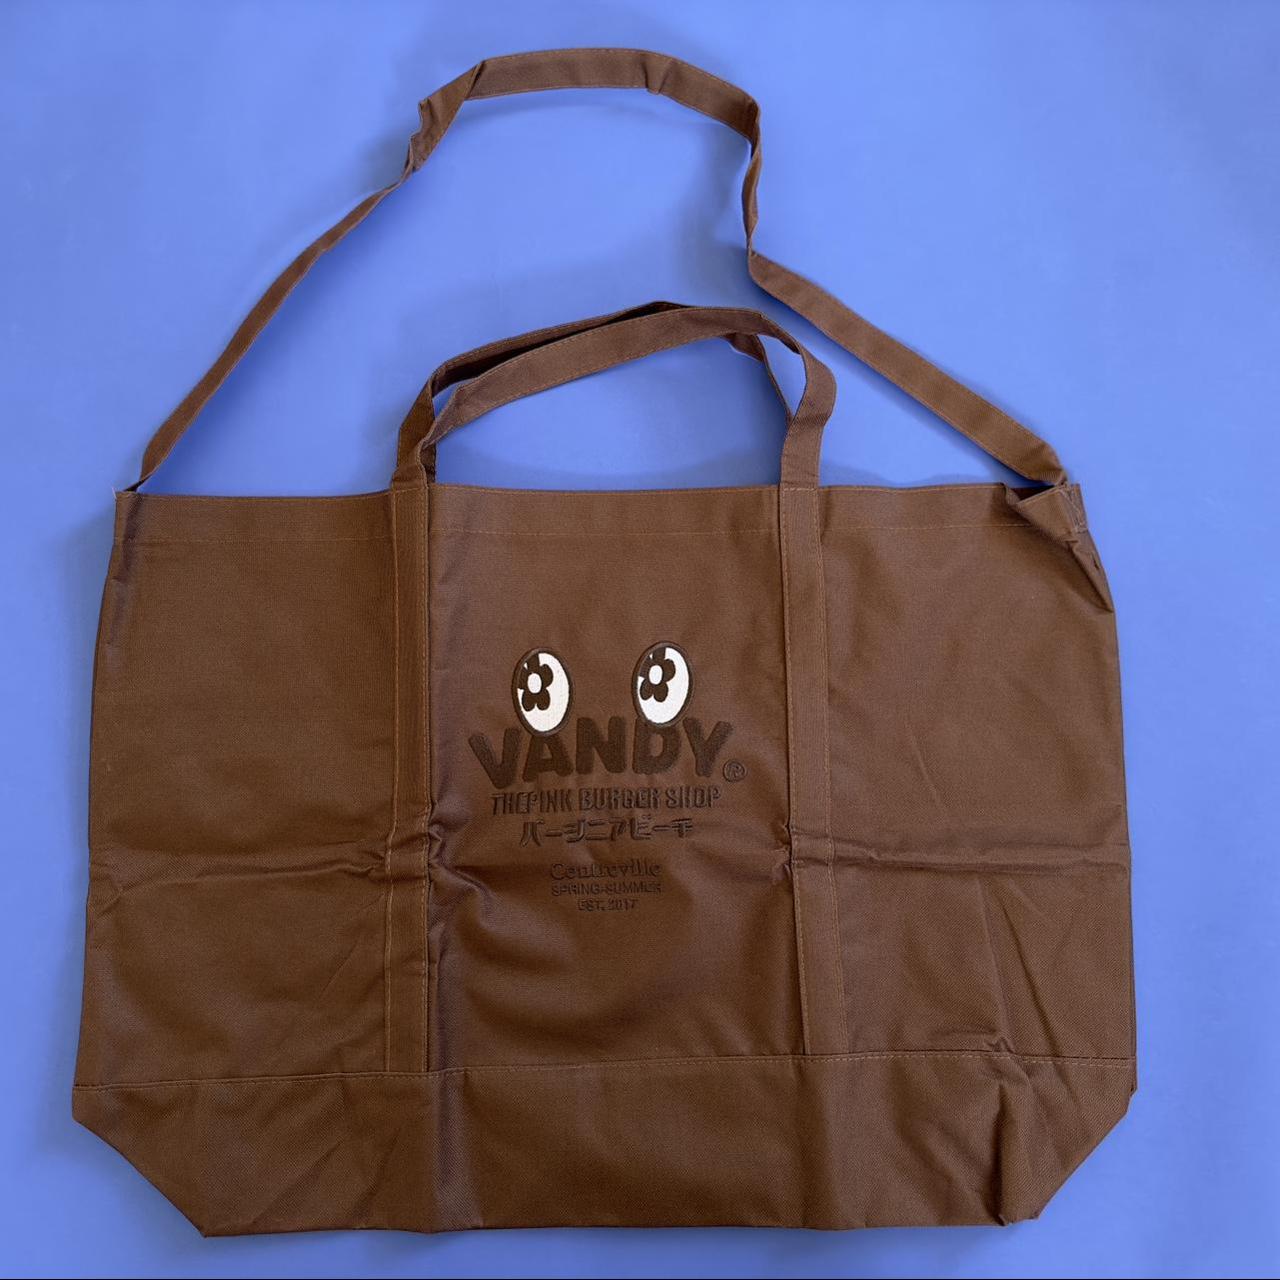 vandy the pink tote?! yeah., it's new, it's cool, it's...